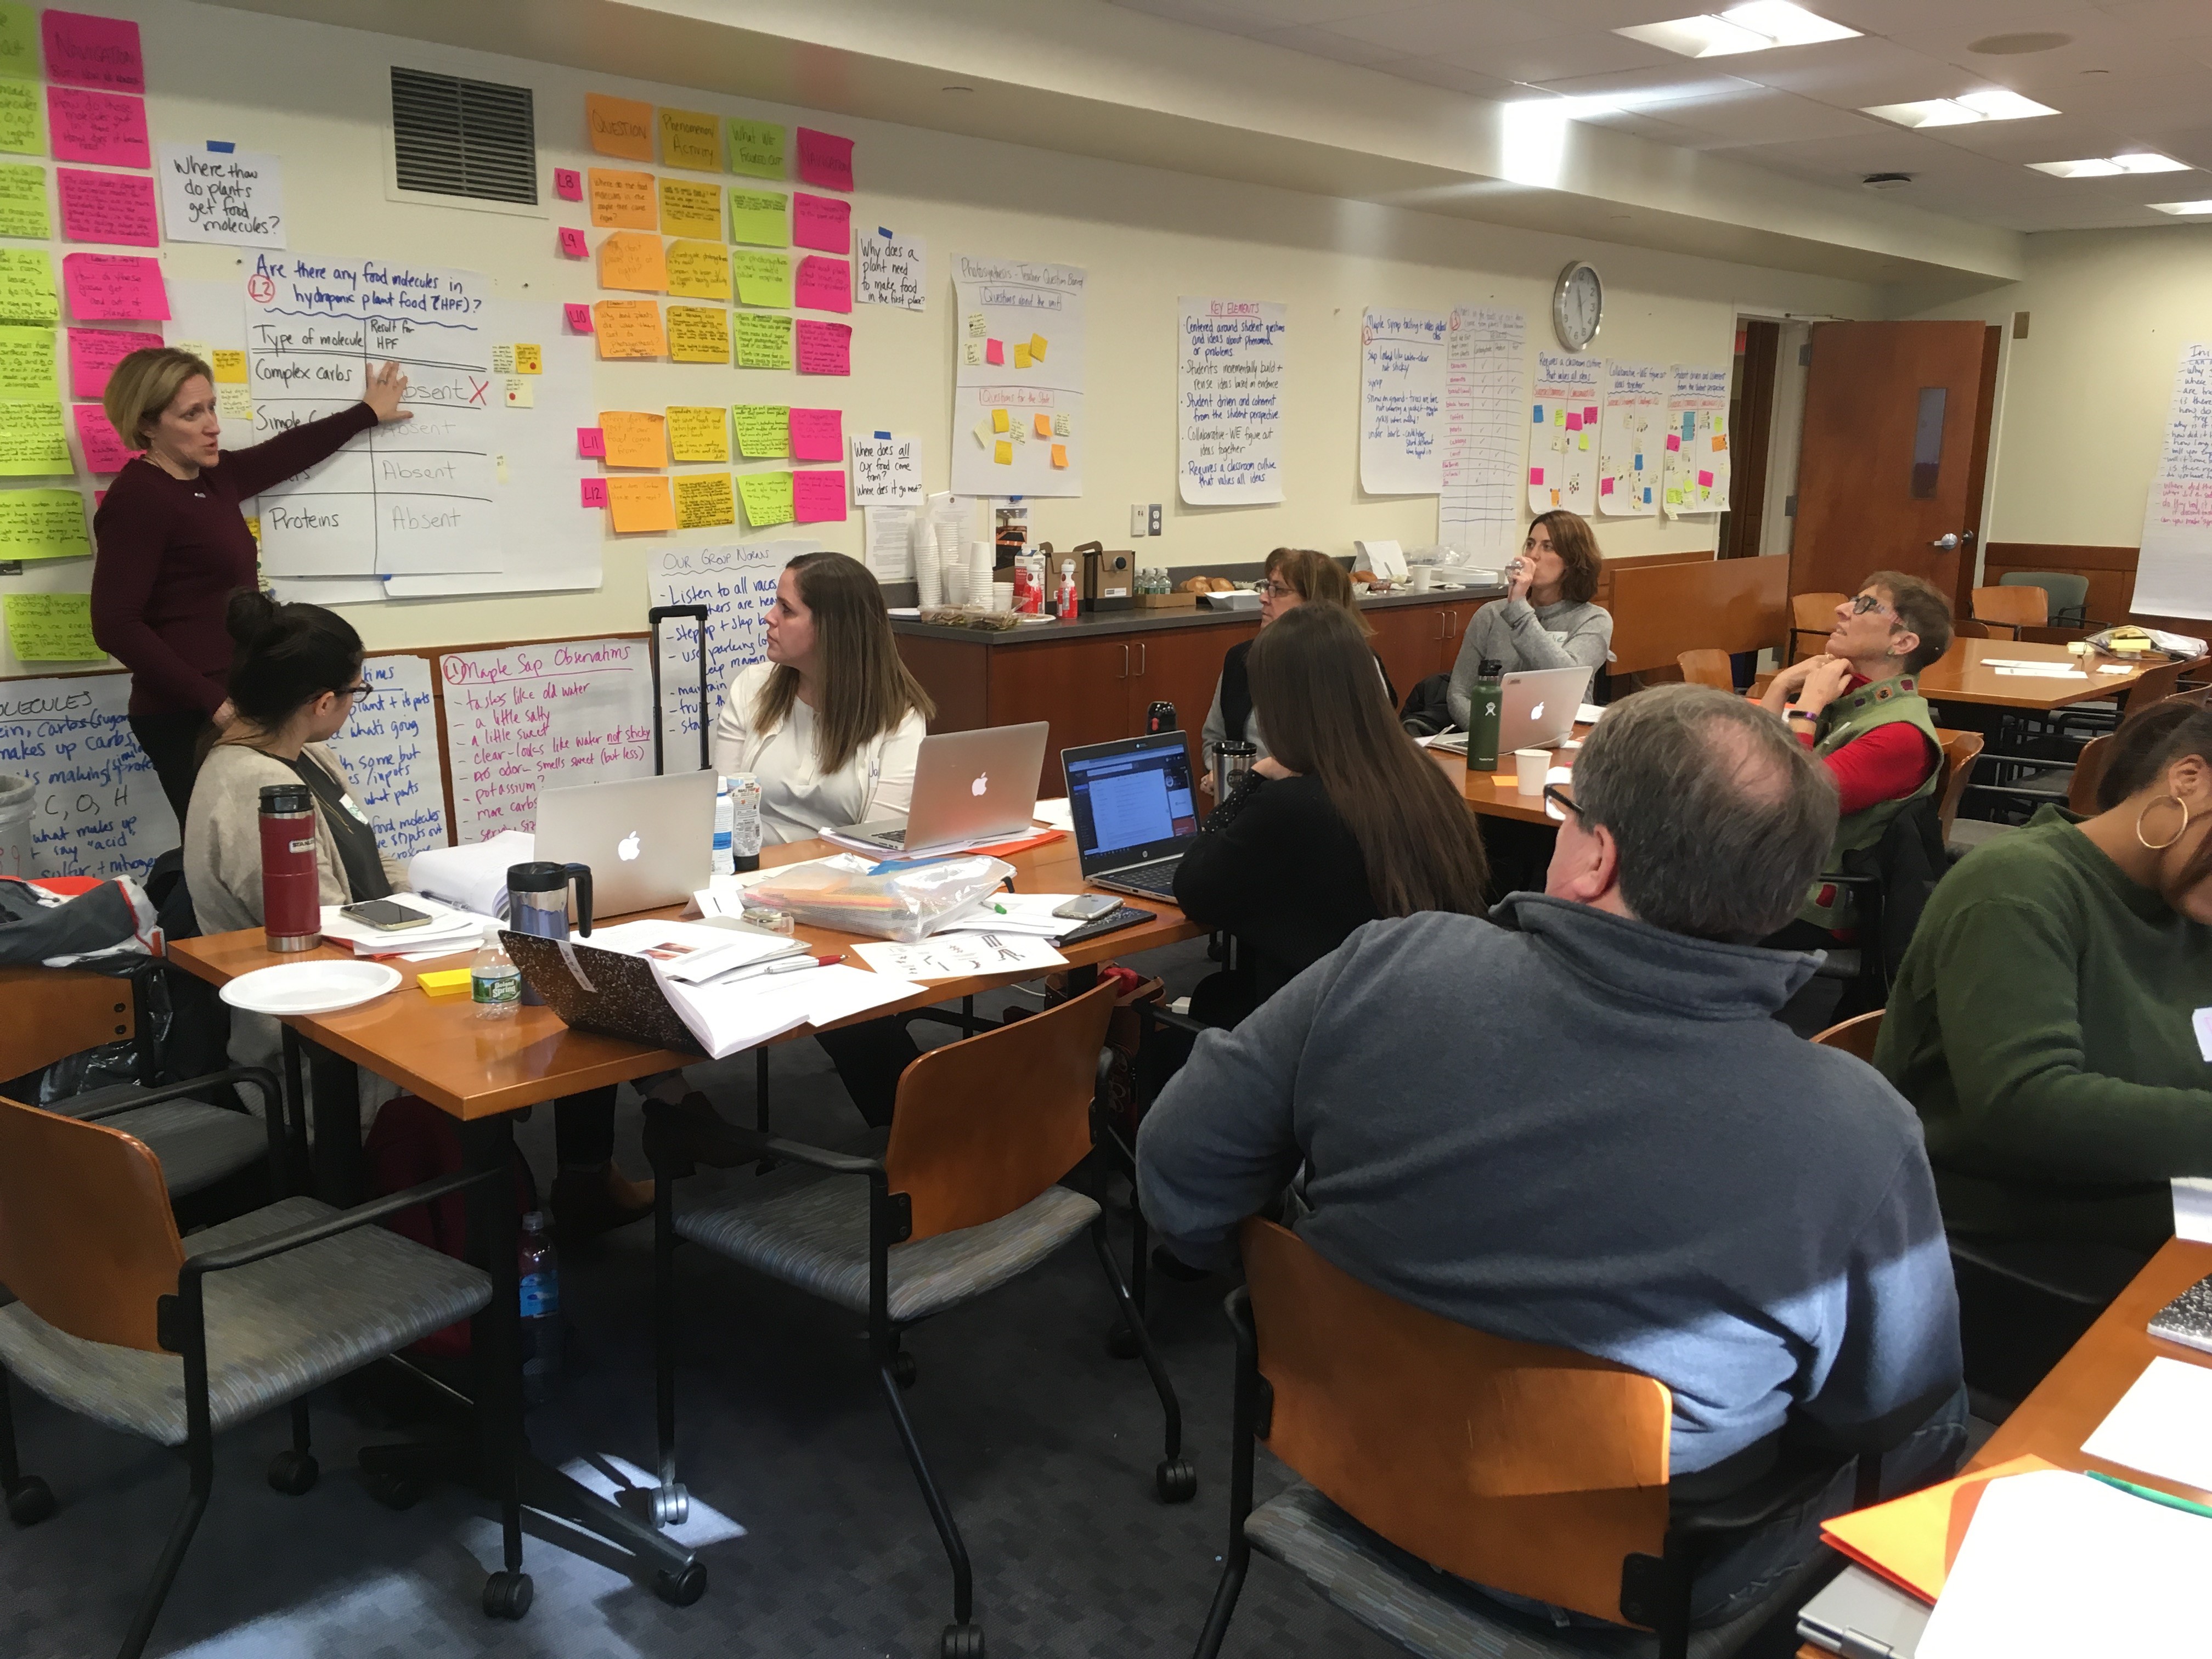 Teachers in a PD workshop engage in an investigation from the students’ perspective. Photo courtesy of the author.